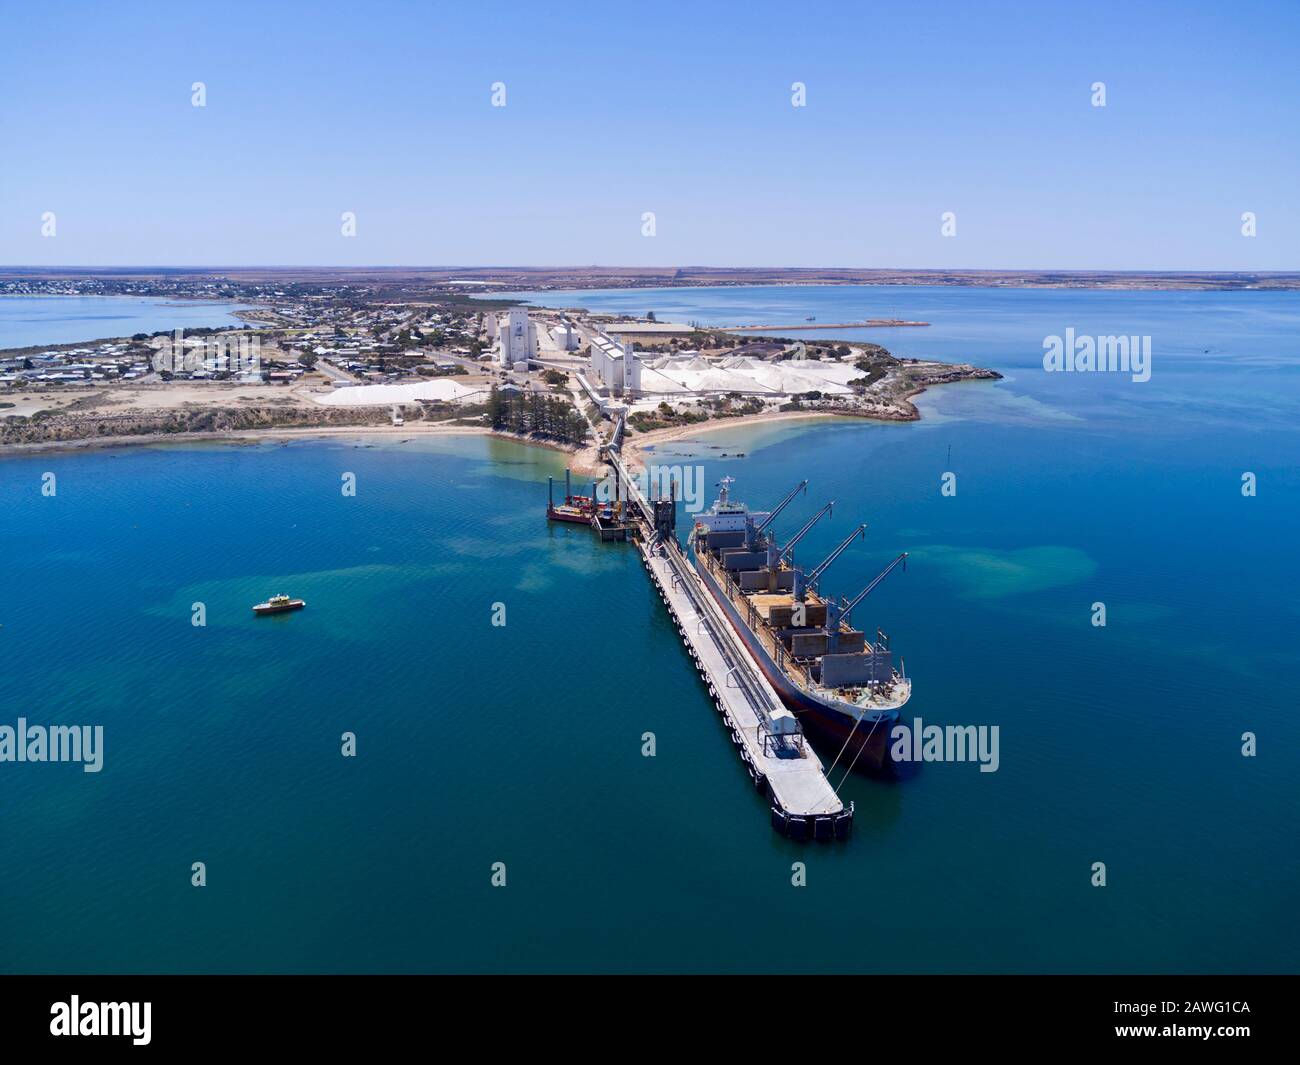 Bulk Carrier Ship berthed at Port Thevenard South Australia to load wheat for export Stock Photo